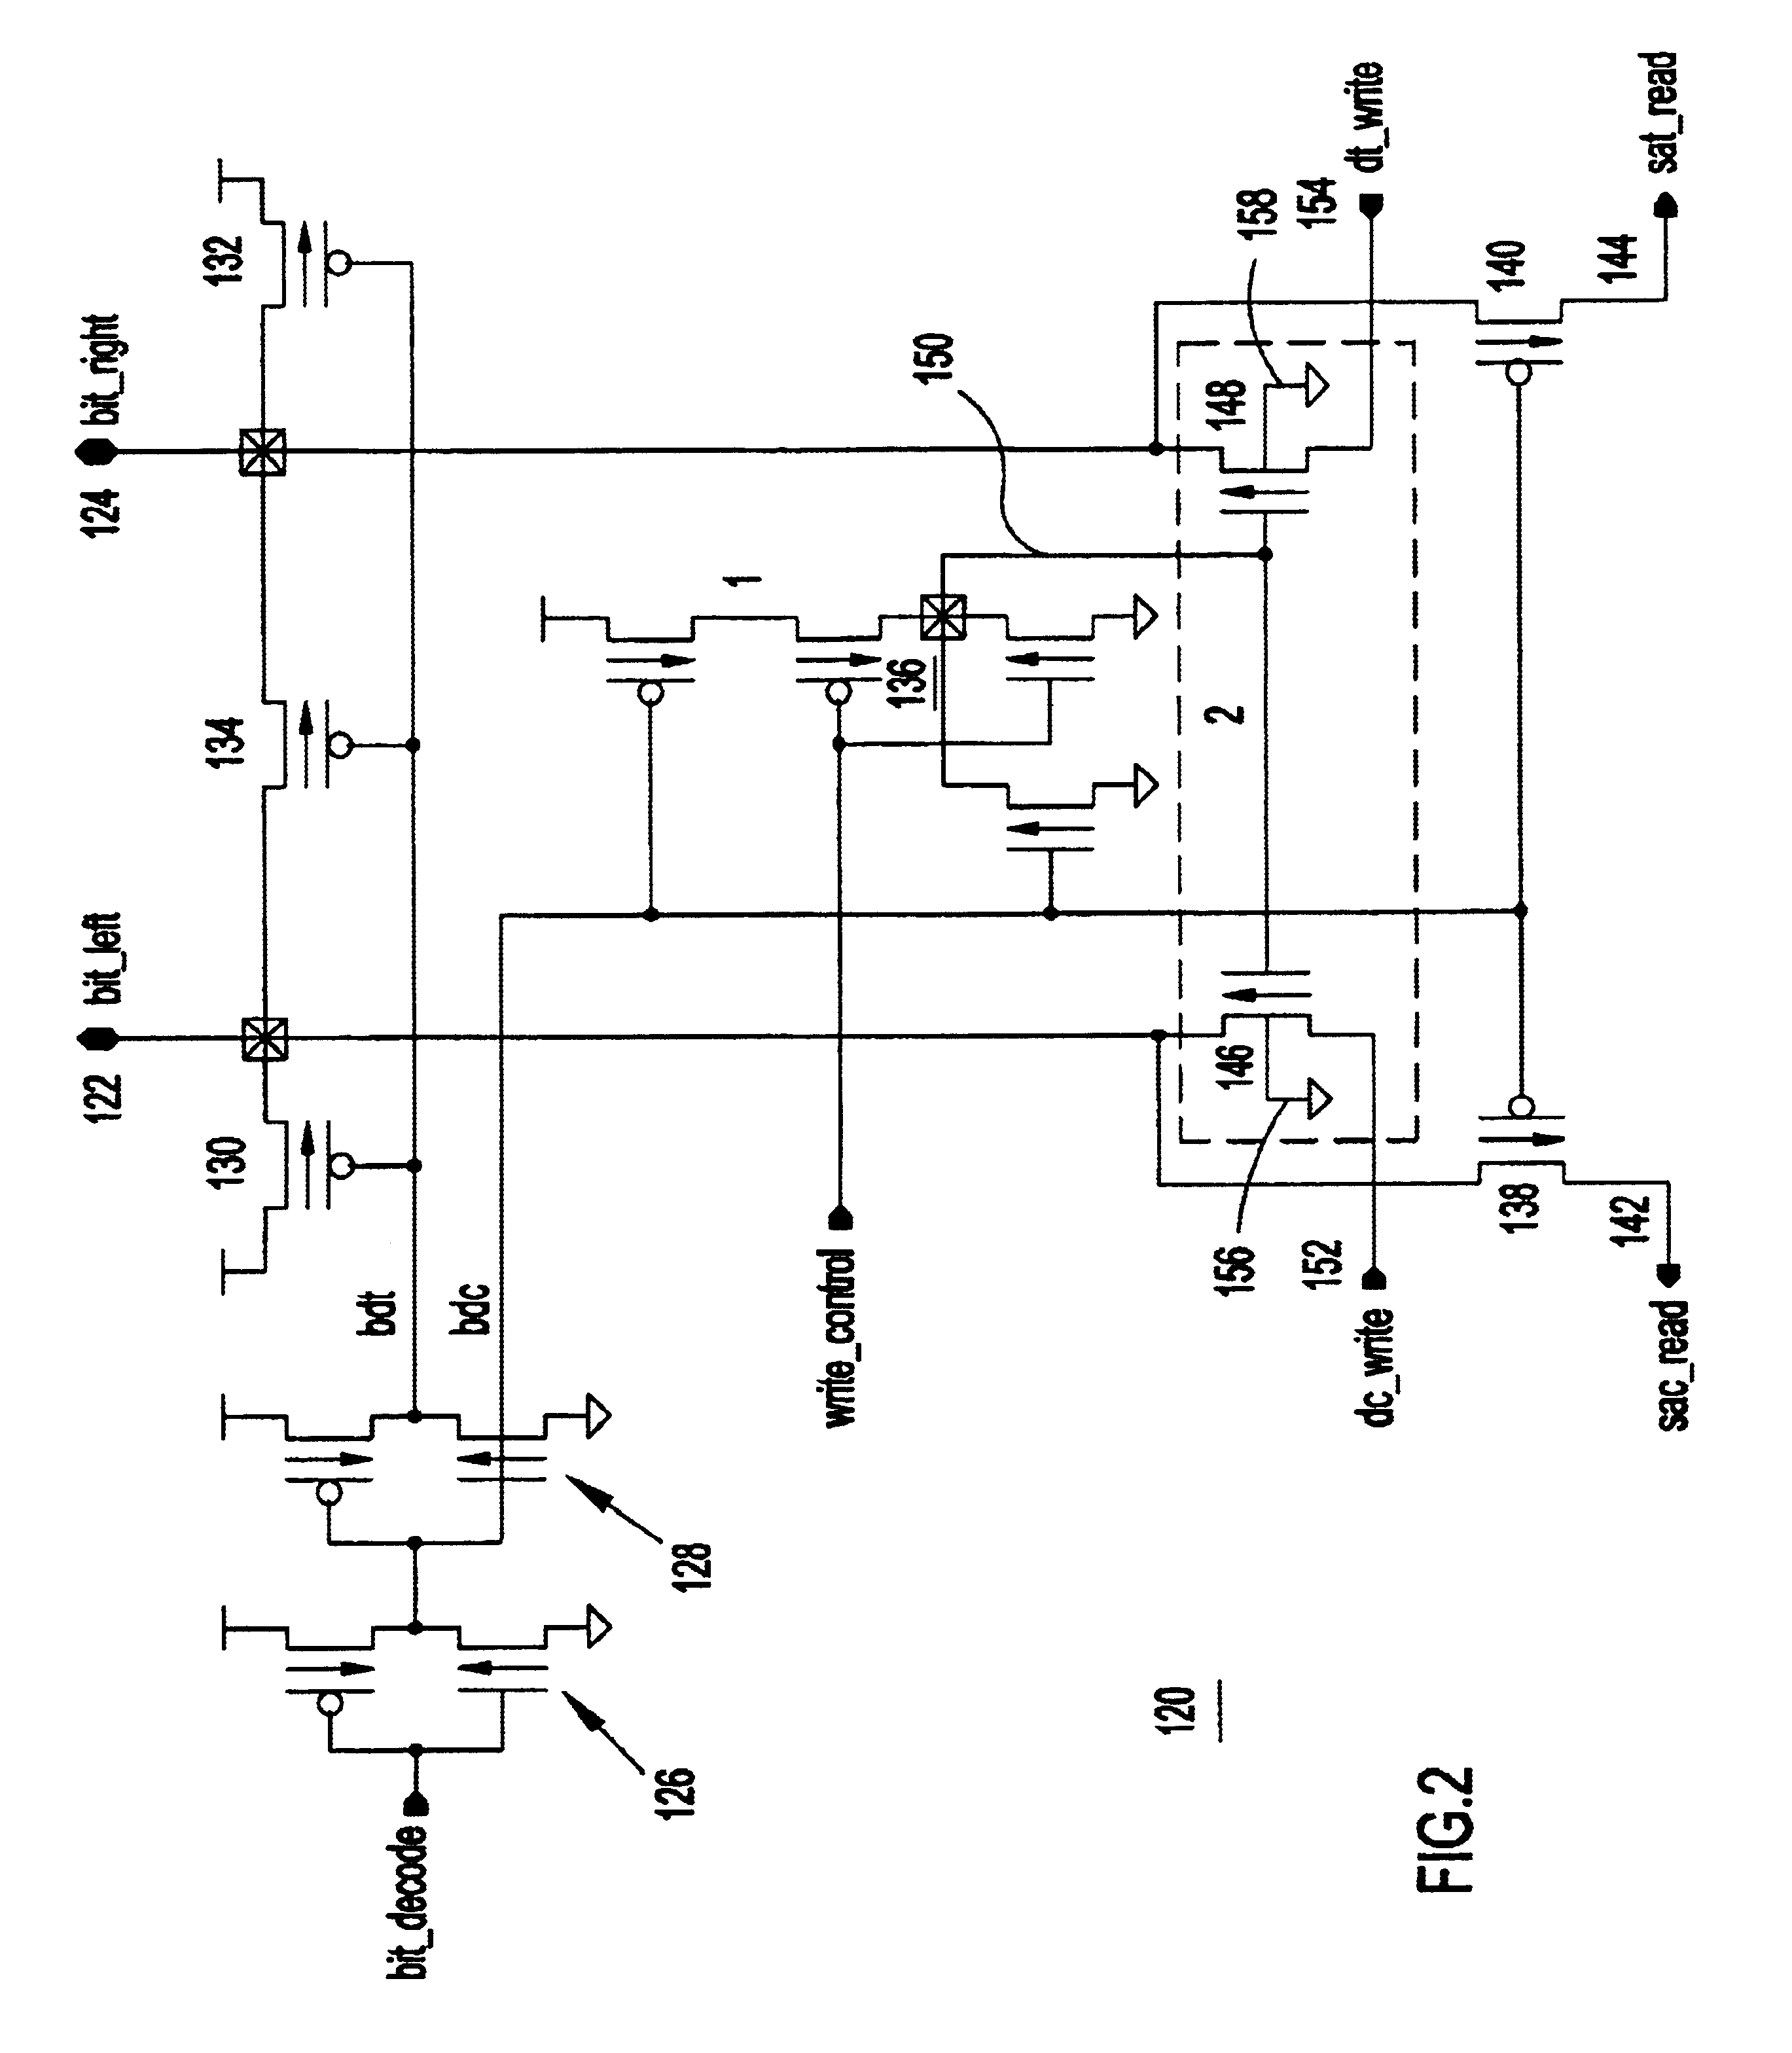 Coupled body contacts for SOI differential circuits